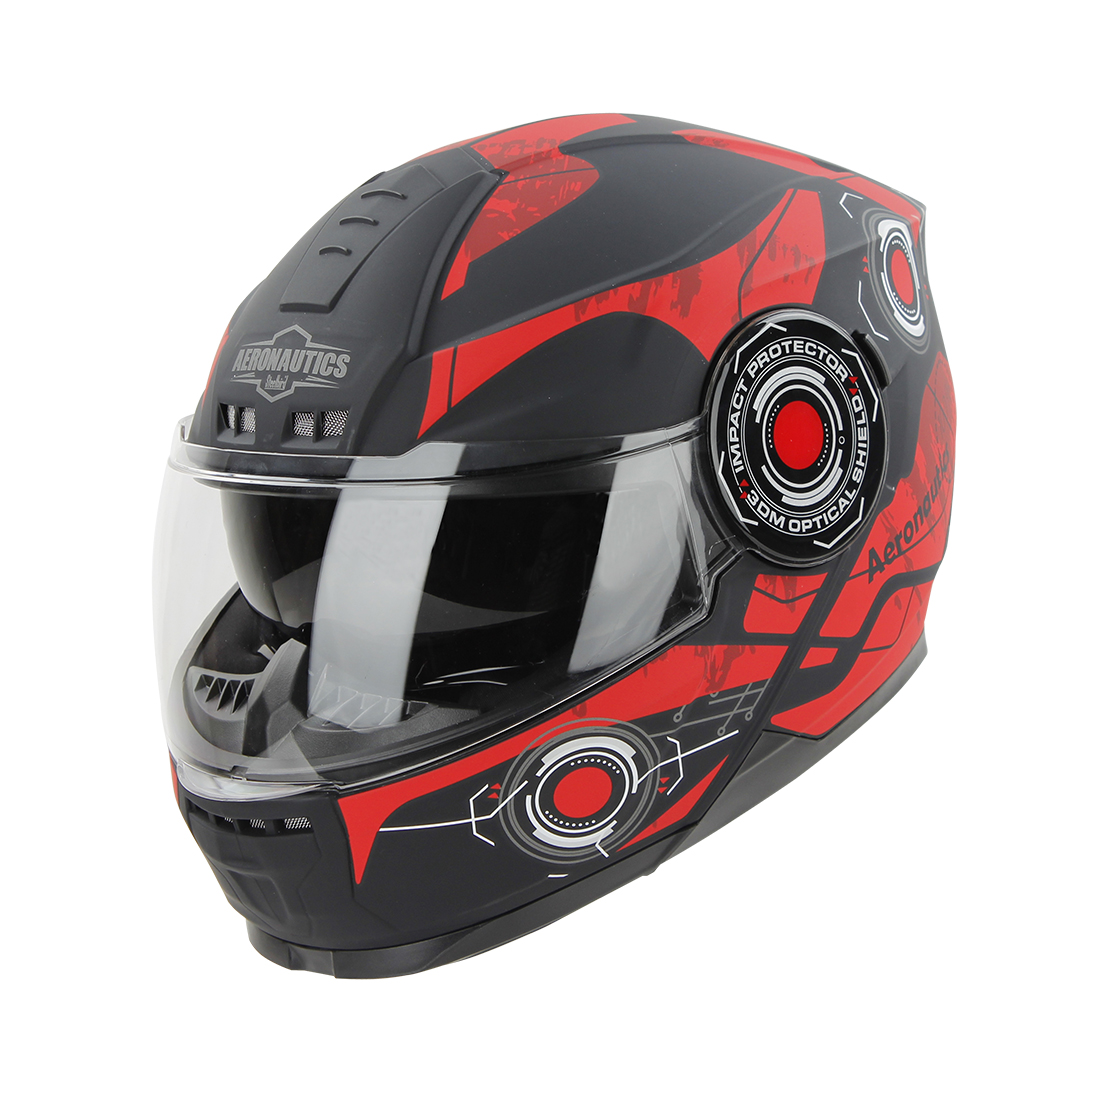 Steelbird SBH-40 Cyber ISI Certified Full Face Graphic Helmet For Men And Women With Inner Sun Shield (Glossy Black Red)